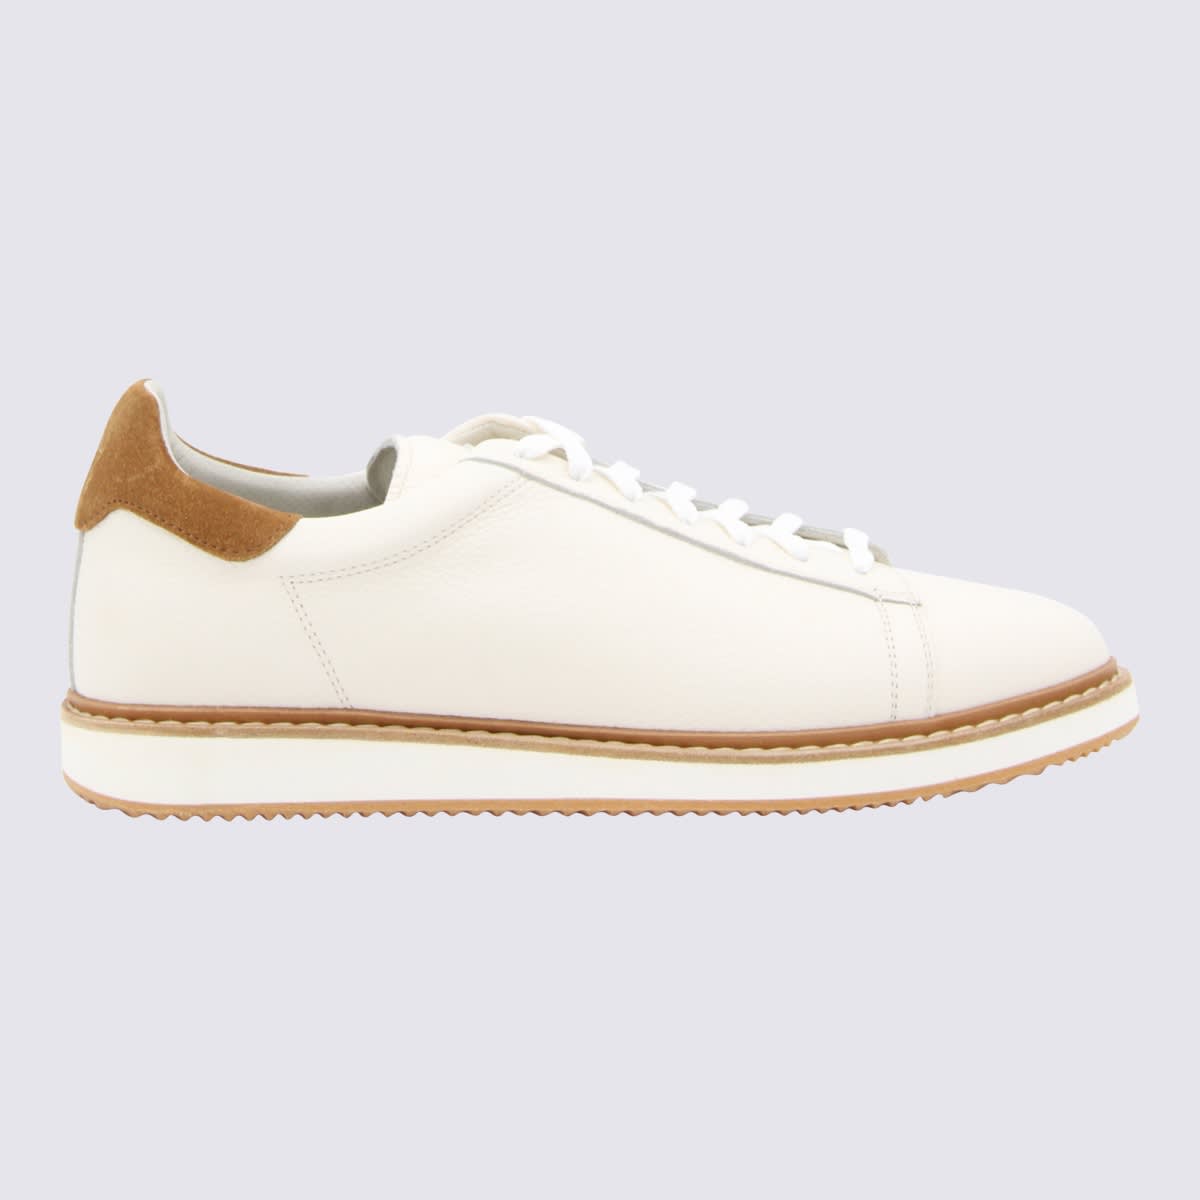 BRUNELLO CUCINELLI WHITE LEATHER AND BROWN SUEDE SNEAKERS